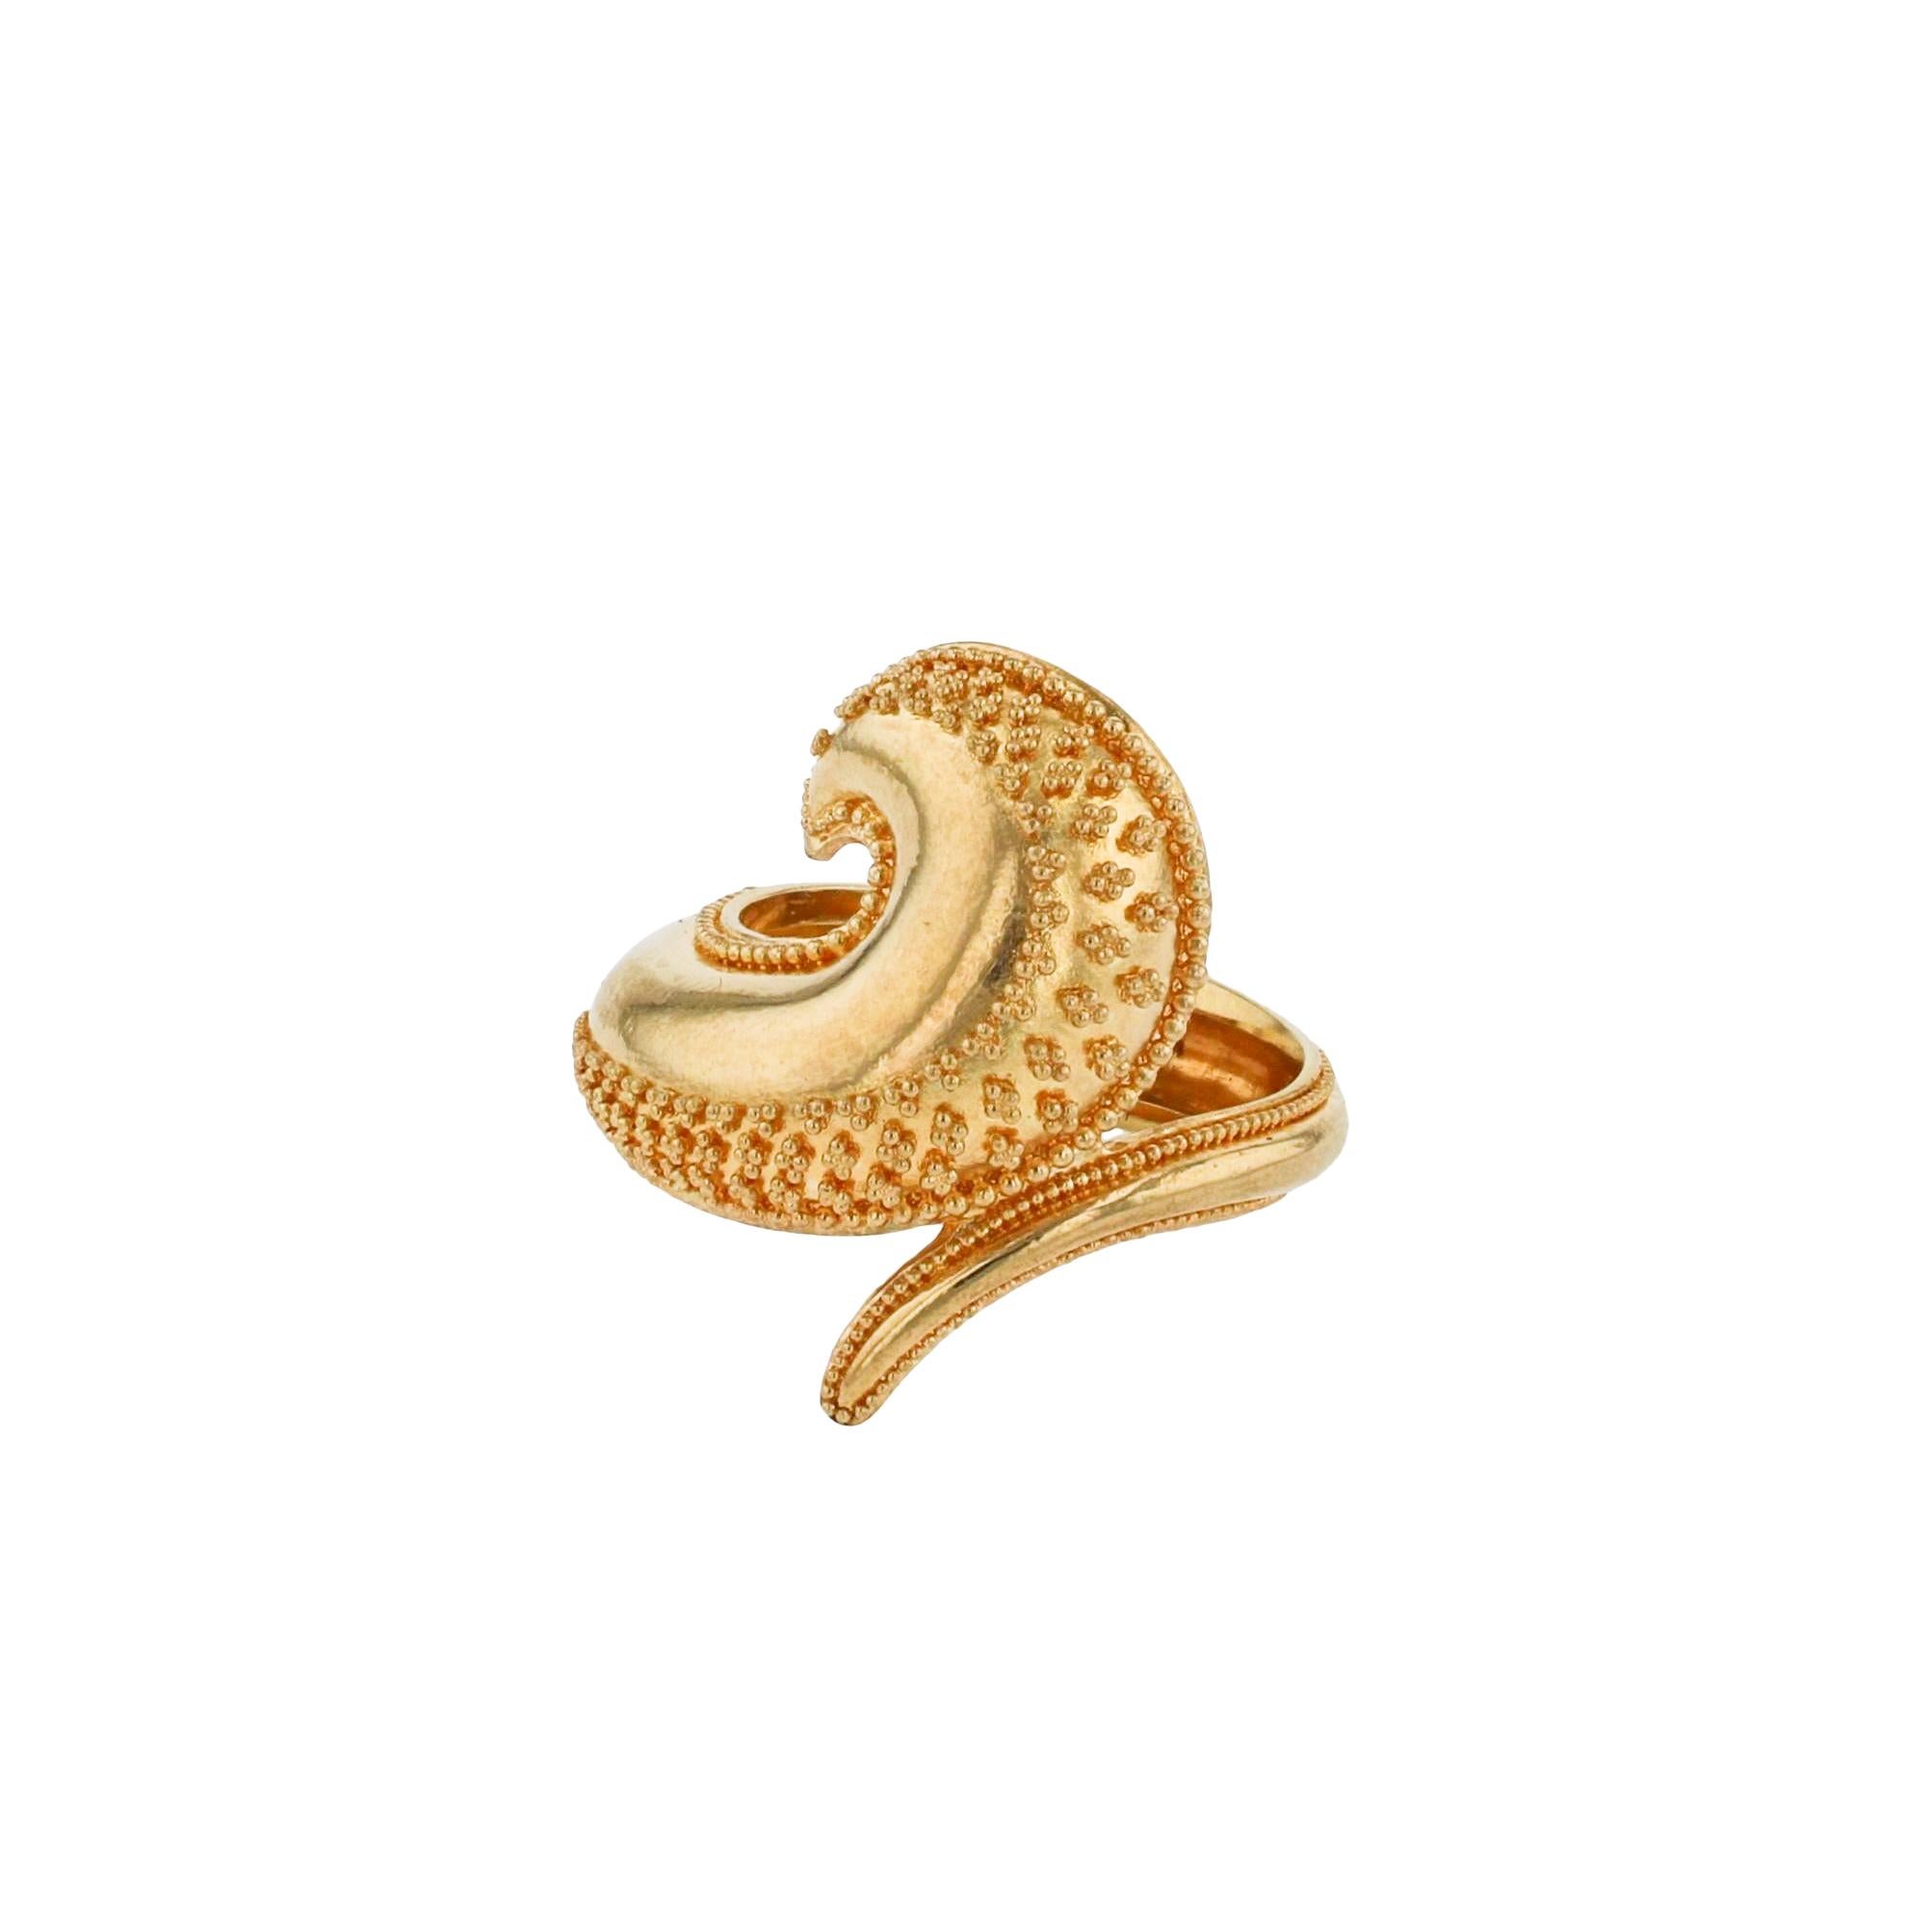 A unique ring from the Kent Raible Studio Collection! The Golden Wave Ring wraps around the finger as the wave curls on the finger displaying an elegant taper of fine granulation! It's a stunning look, but don't wear it with loose knits as it could